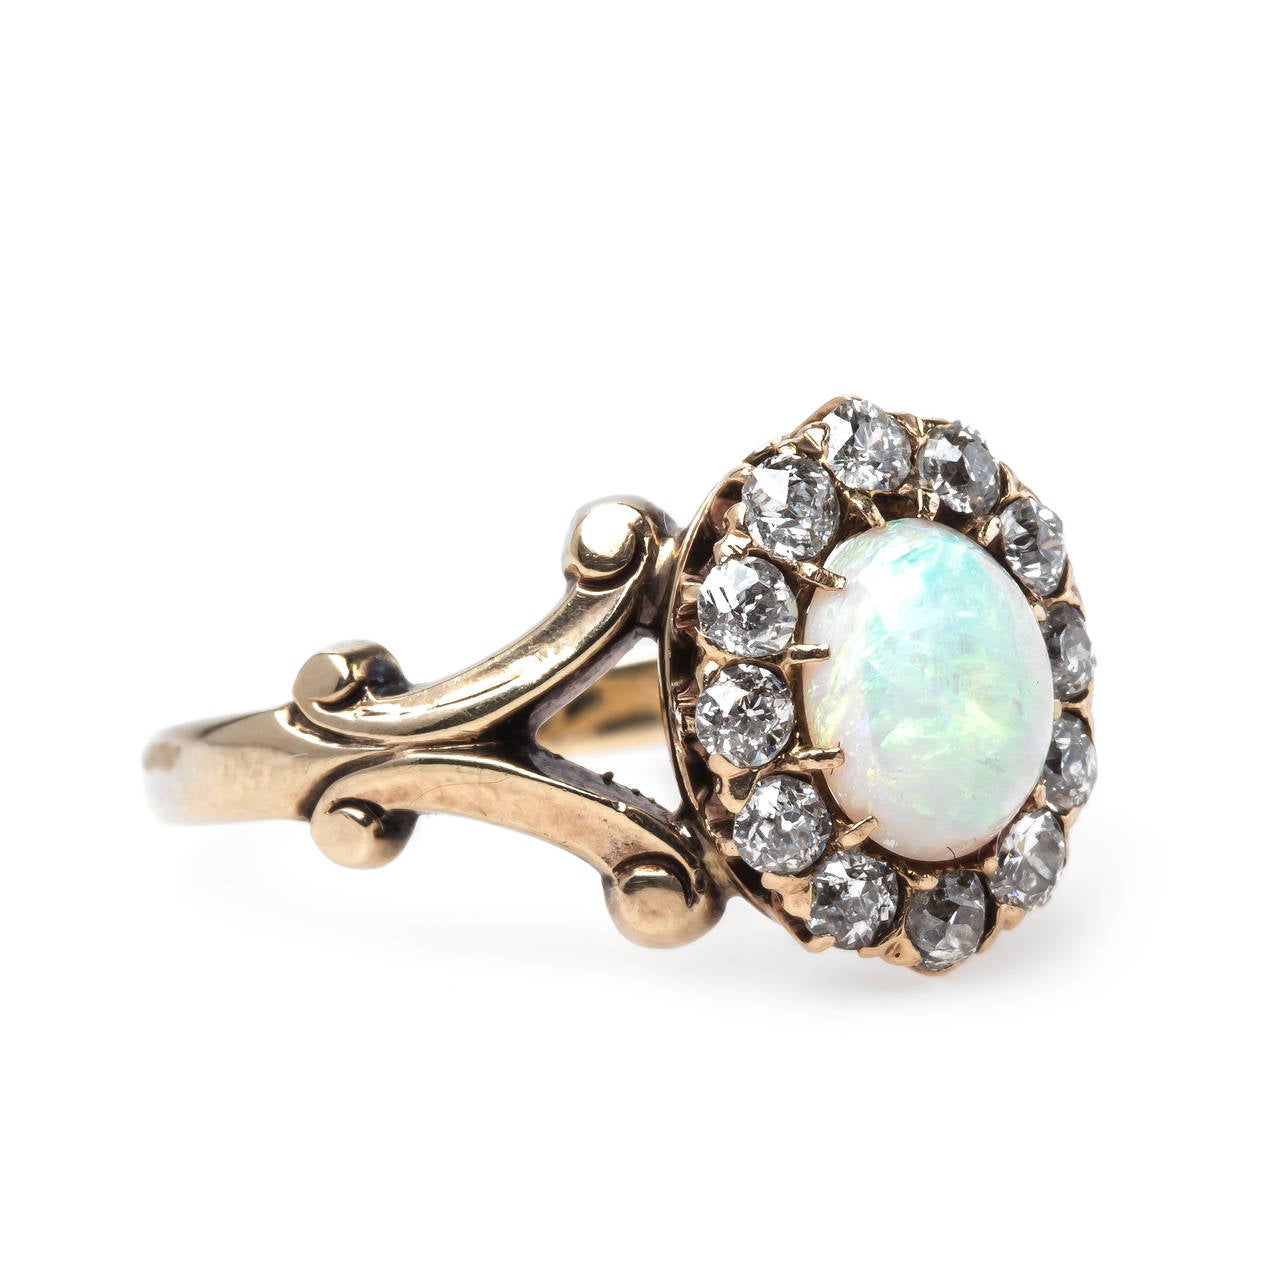  Victorian  Opal Diamond Gold  Engagement  Ring  at 1stdibs